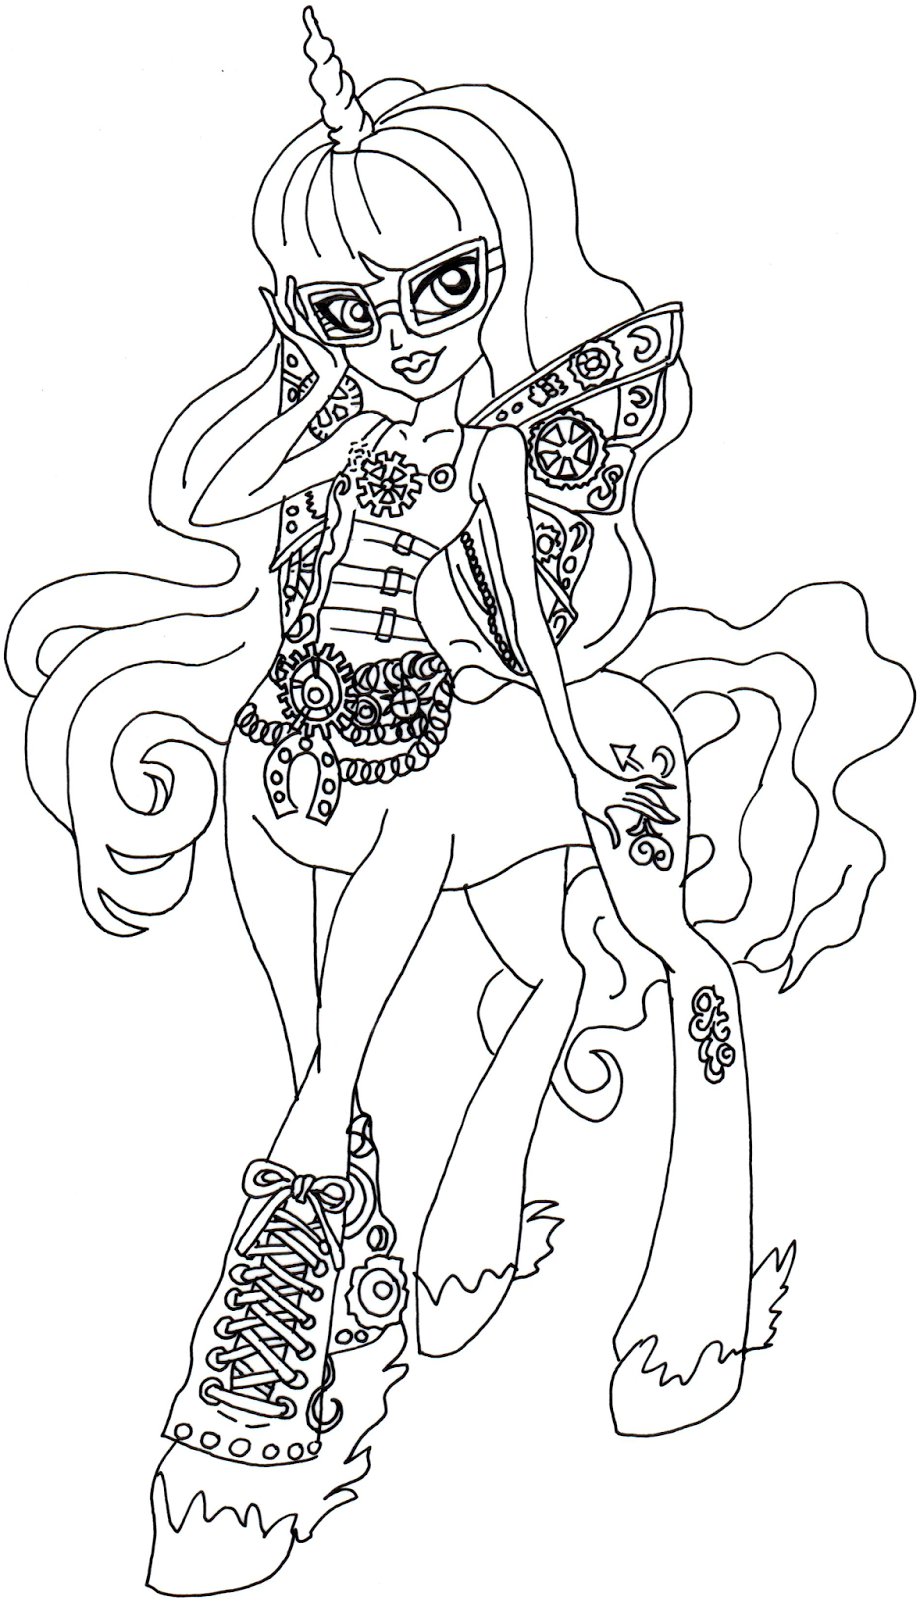 Download Free Printable Monster High Coloring Pages: Penepole Steamtail Monster High Coloring Page